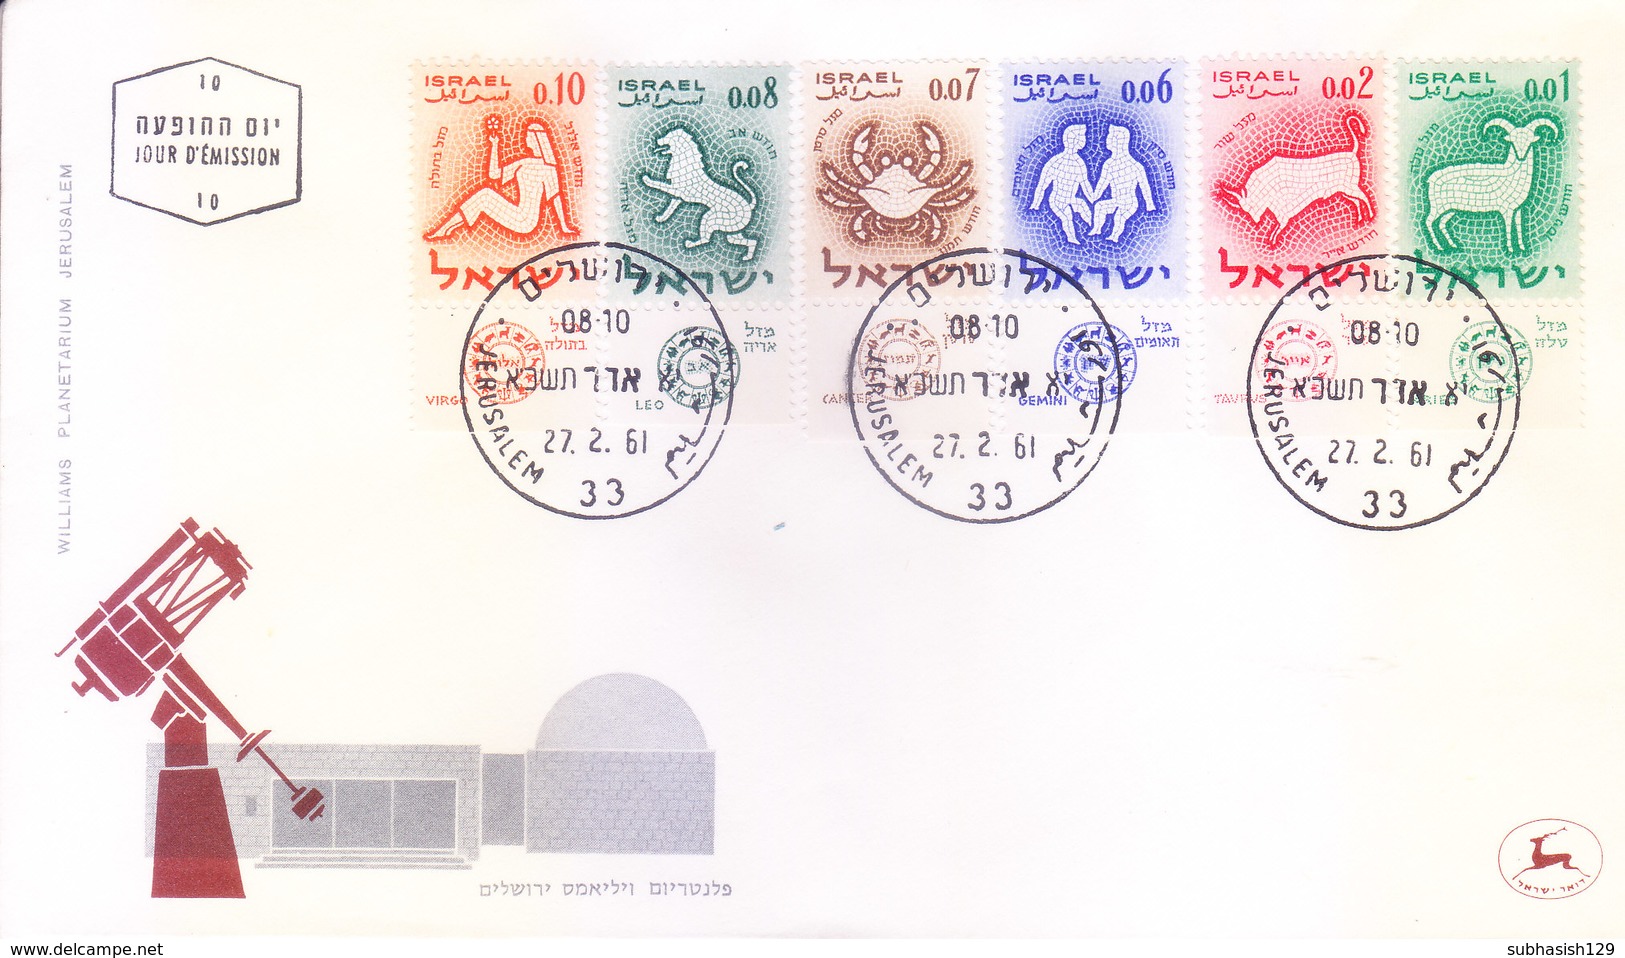 ISRAEL : FIRST DAY COVER : 27-02-1961 : ISSUED FROM JERUSALEM : WILLIAM PLANETARIUM : USE OF TAB STAMPS : 6v COMPLETE - Covers & Documents